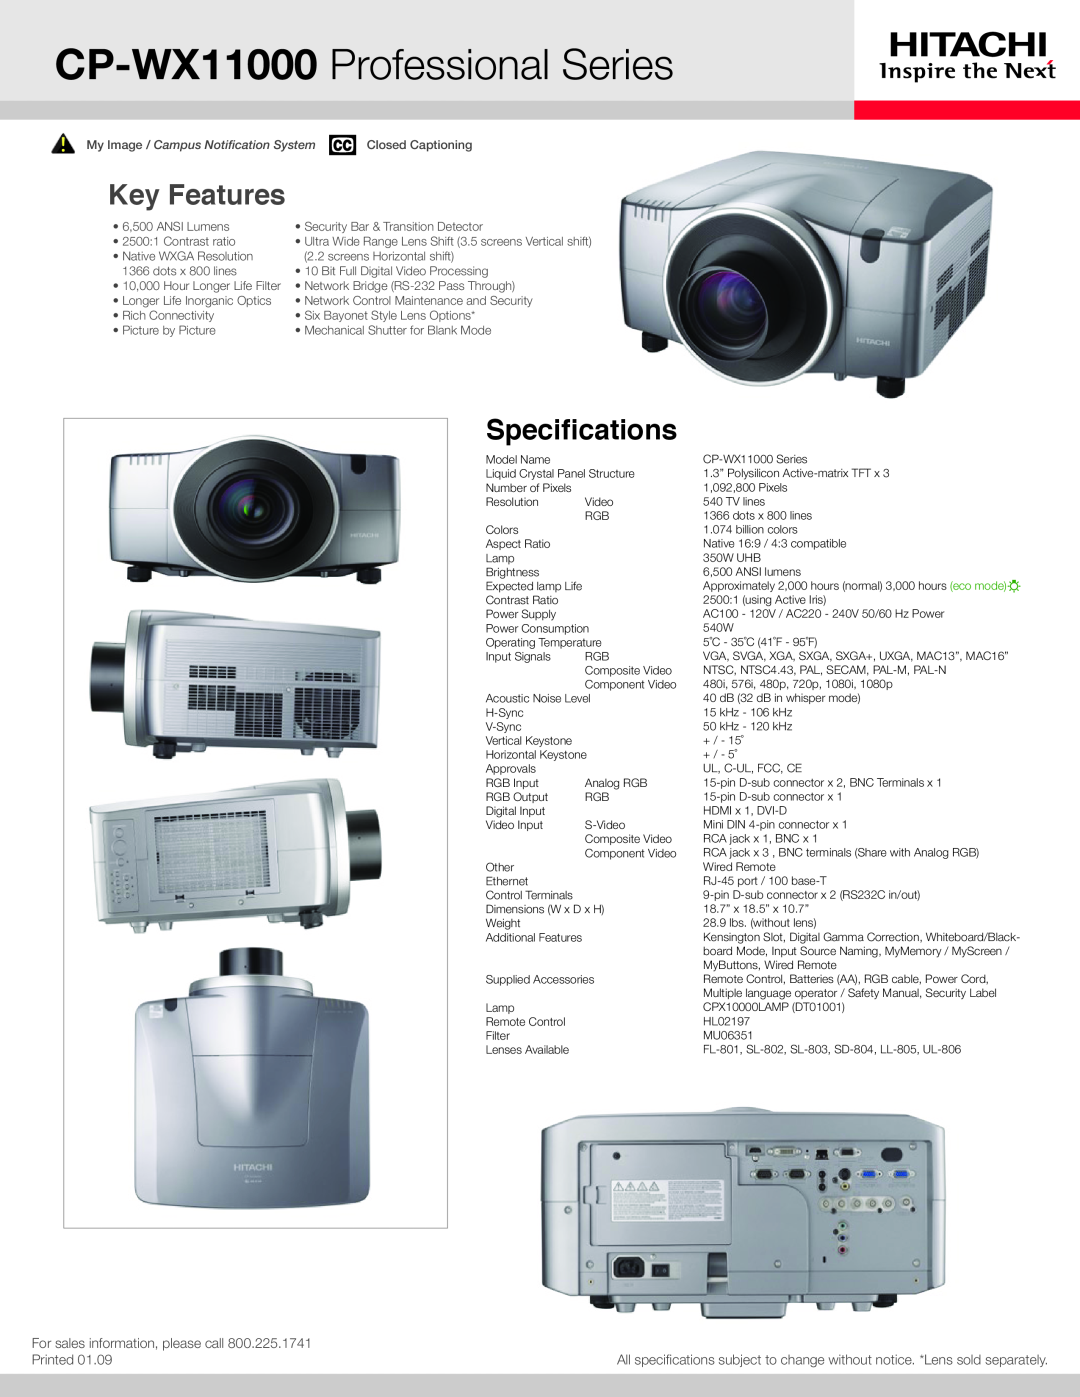 Hitachi manual CP-WX11000 Professional Series, Key Features, Specifications 